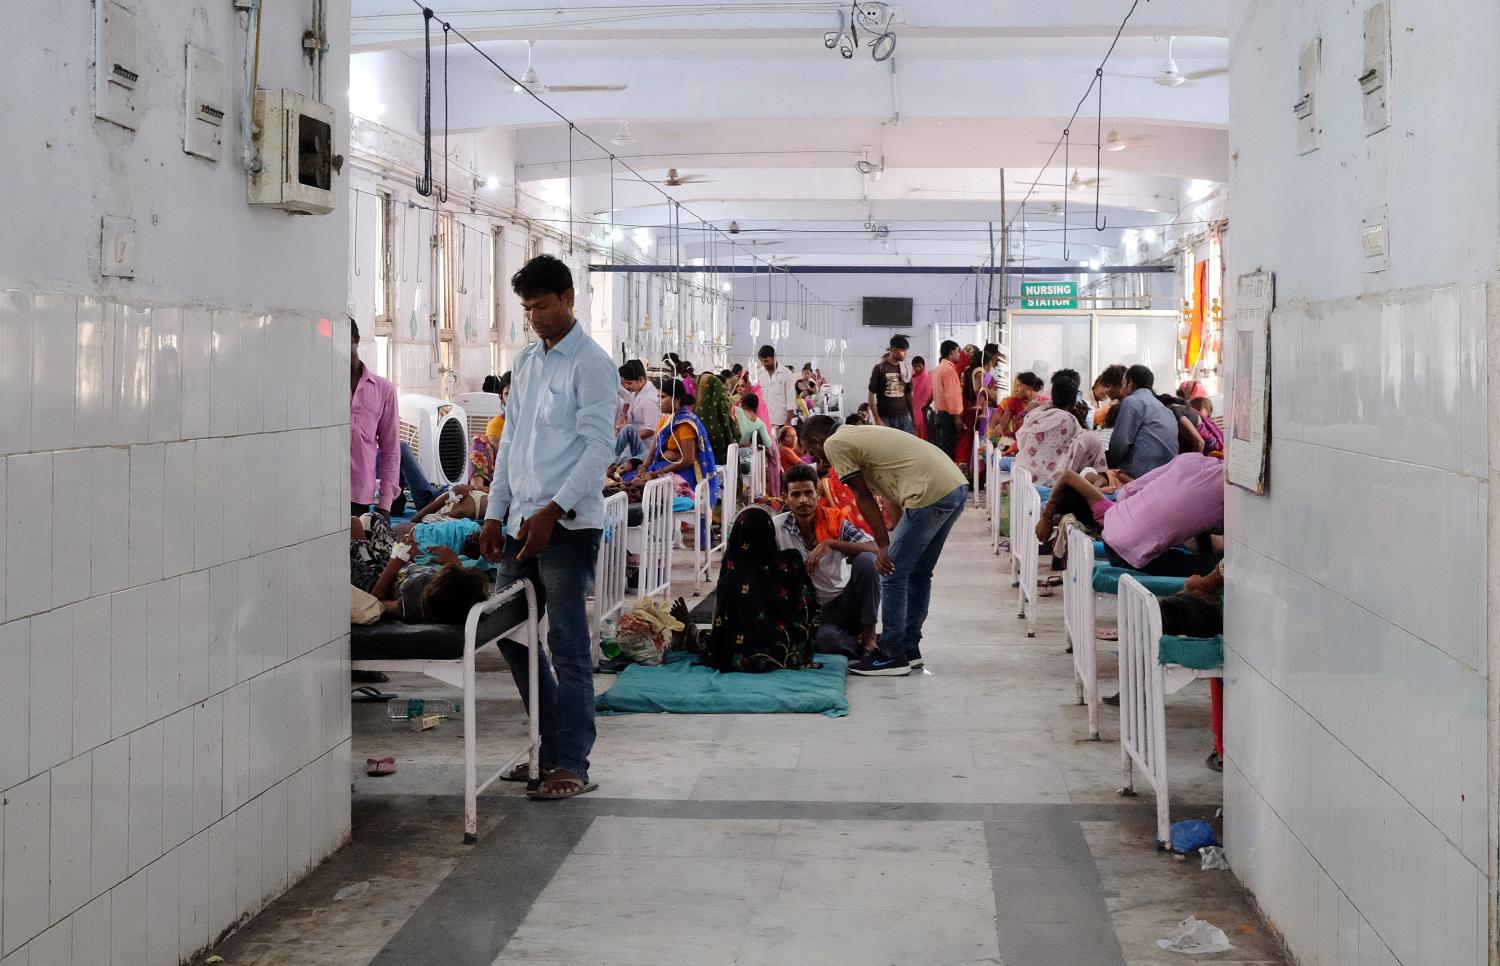 Relatives visit child patients who suffer from acute encephalitis syndrome in a hospital ward in Muzaffarpur, in the eastern state of Bihar, India, June 19, 2019. REUTERS/Alasdair Pal